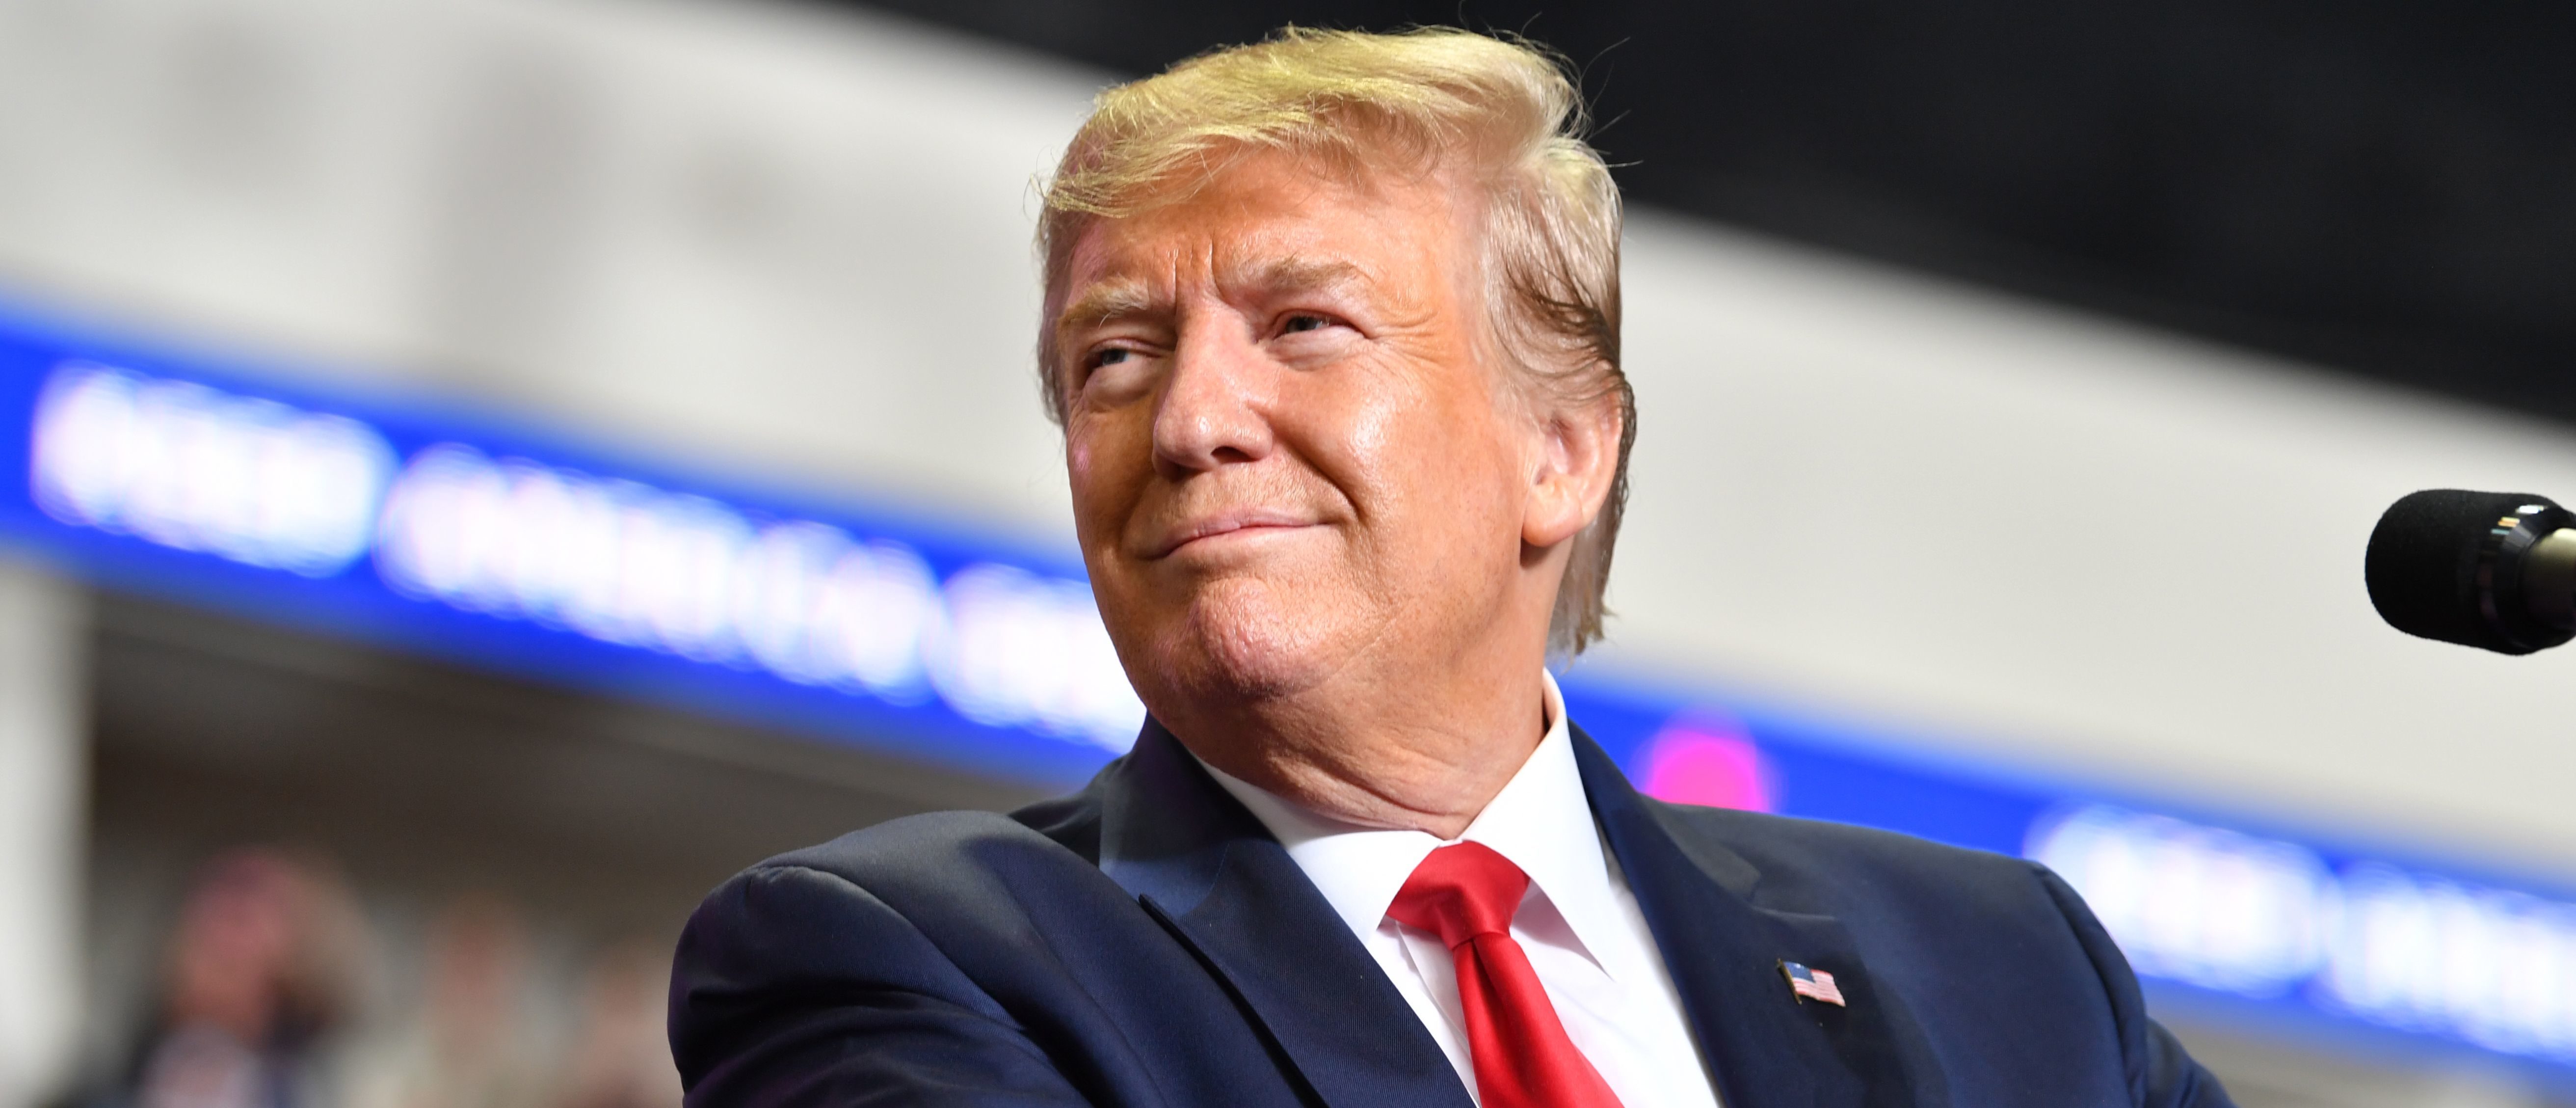 President Donald Trump at a campaign rally in Rio Rancho, New Mexico, on September 16, 2019. (Nicholas Kamm/AFP/Getty Images)